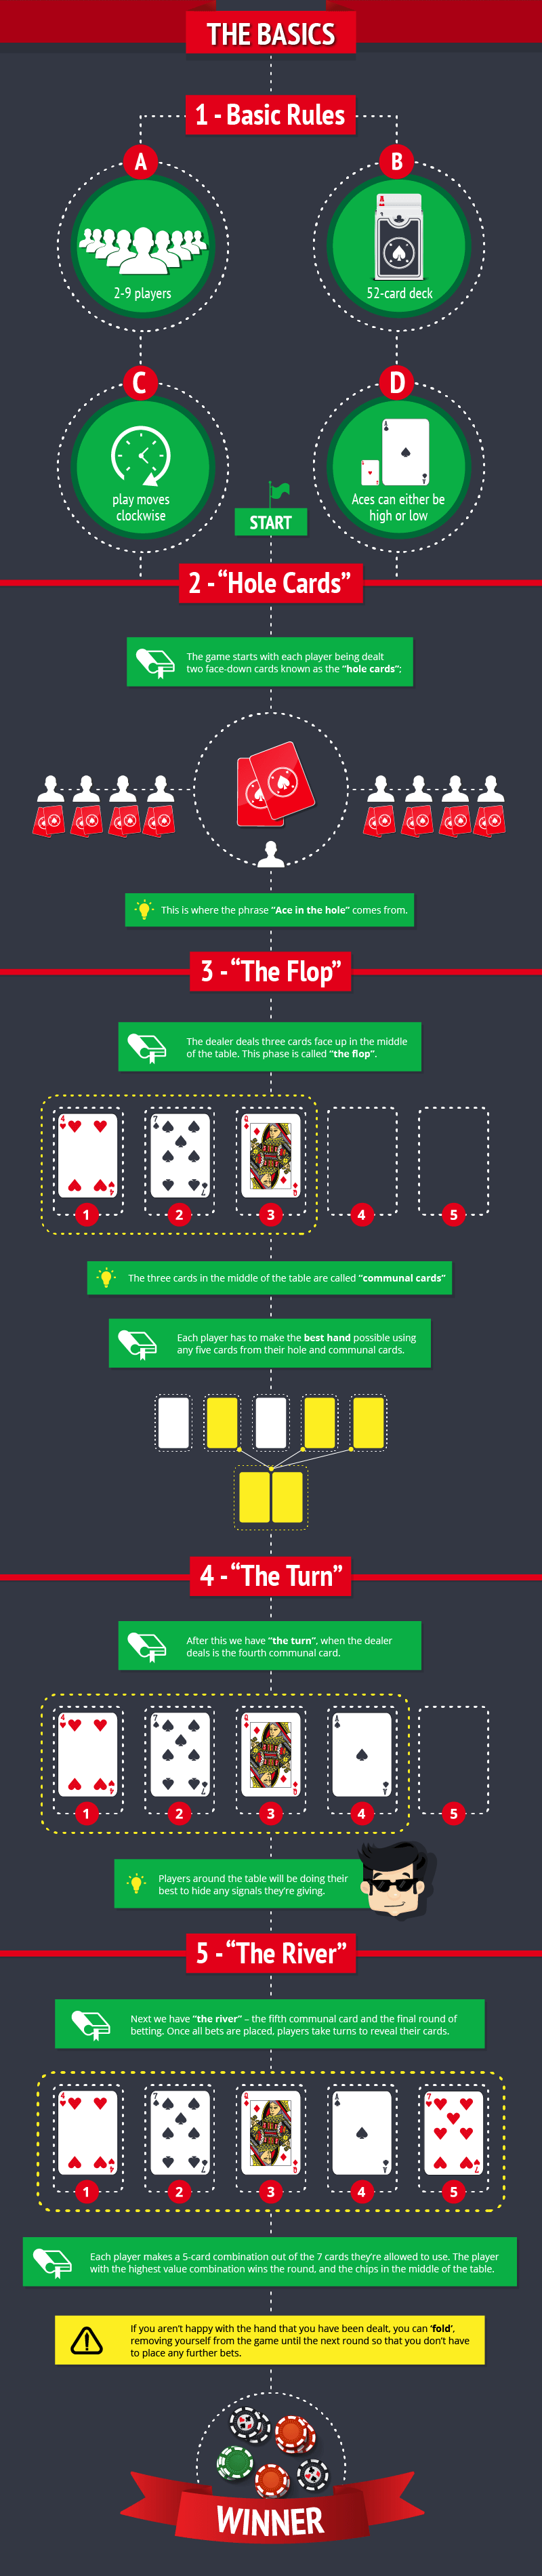 beginners-guide-to-poker-featured-basics